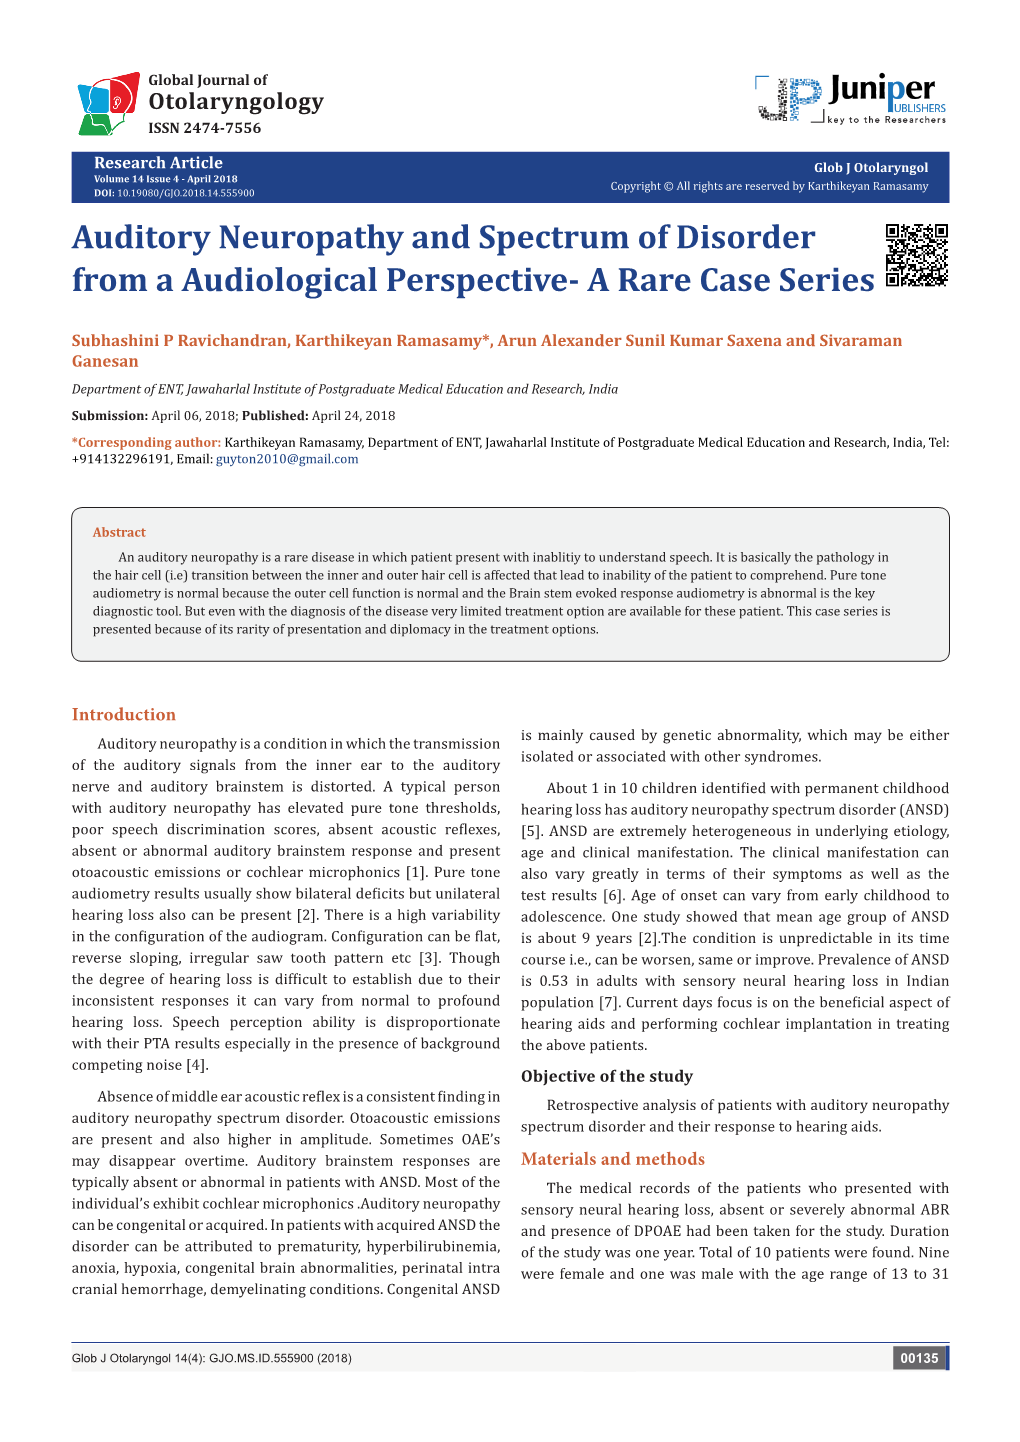 Auditory Neuropathy and Spectrum of Disorder from a Audiological Perspective- a Rare Case Series